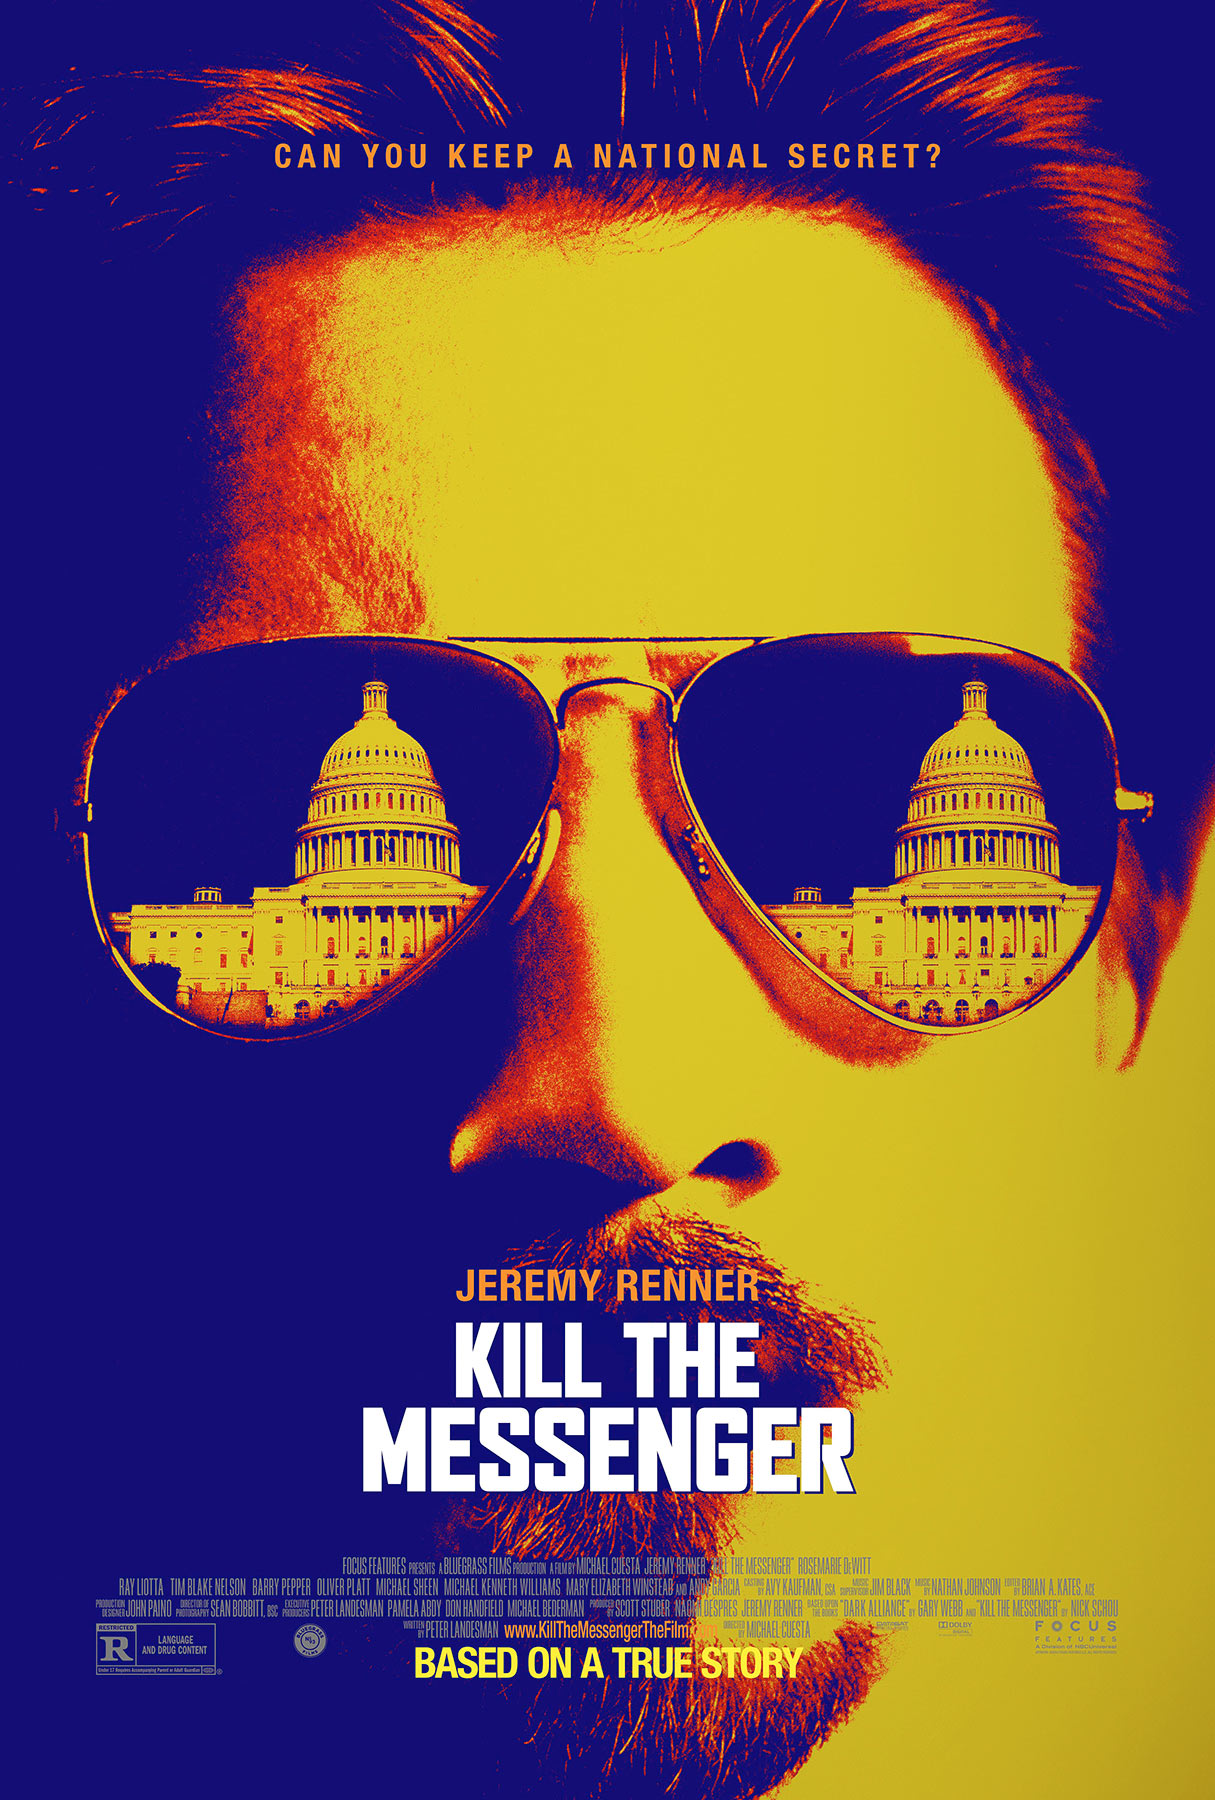 kill-the-messenger-movie-poster-images